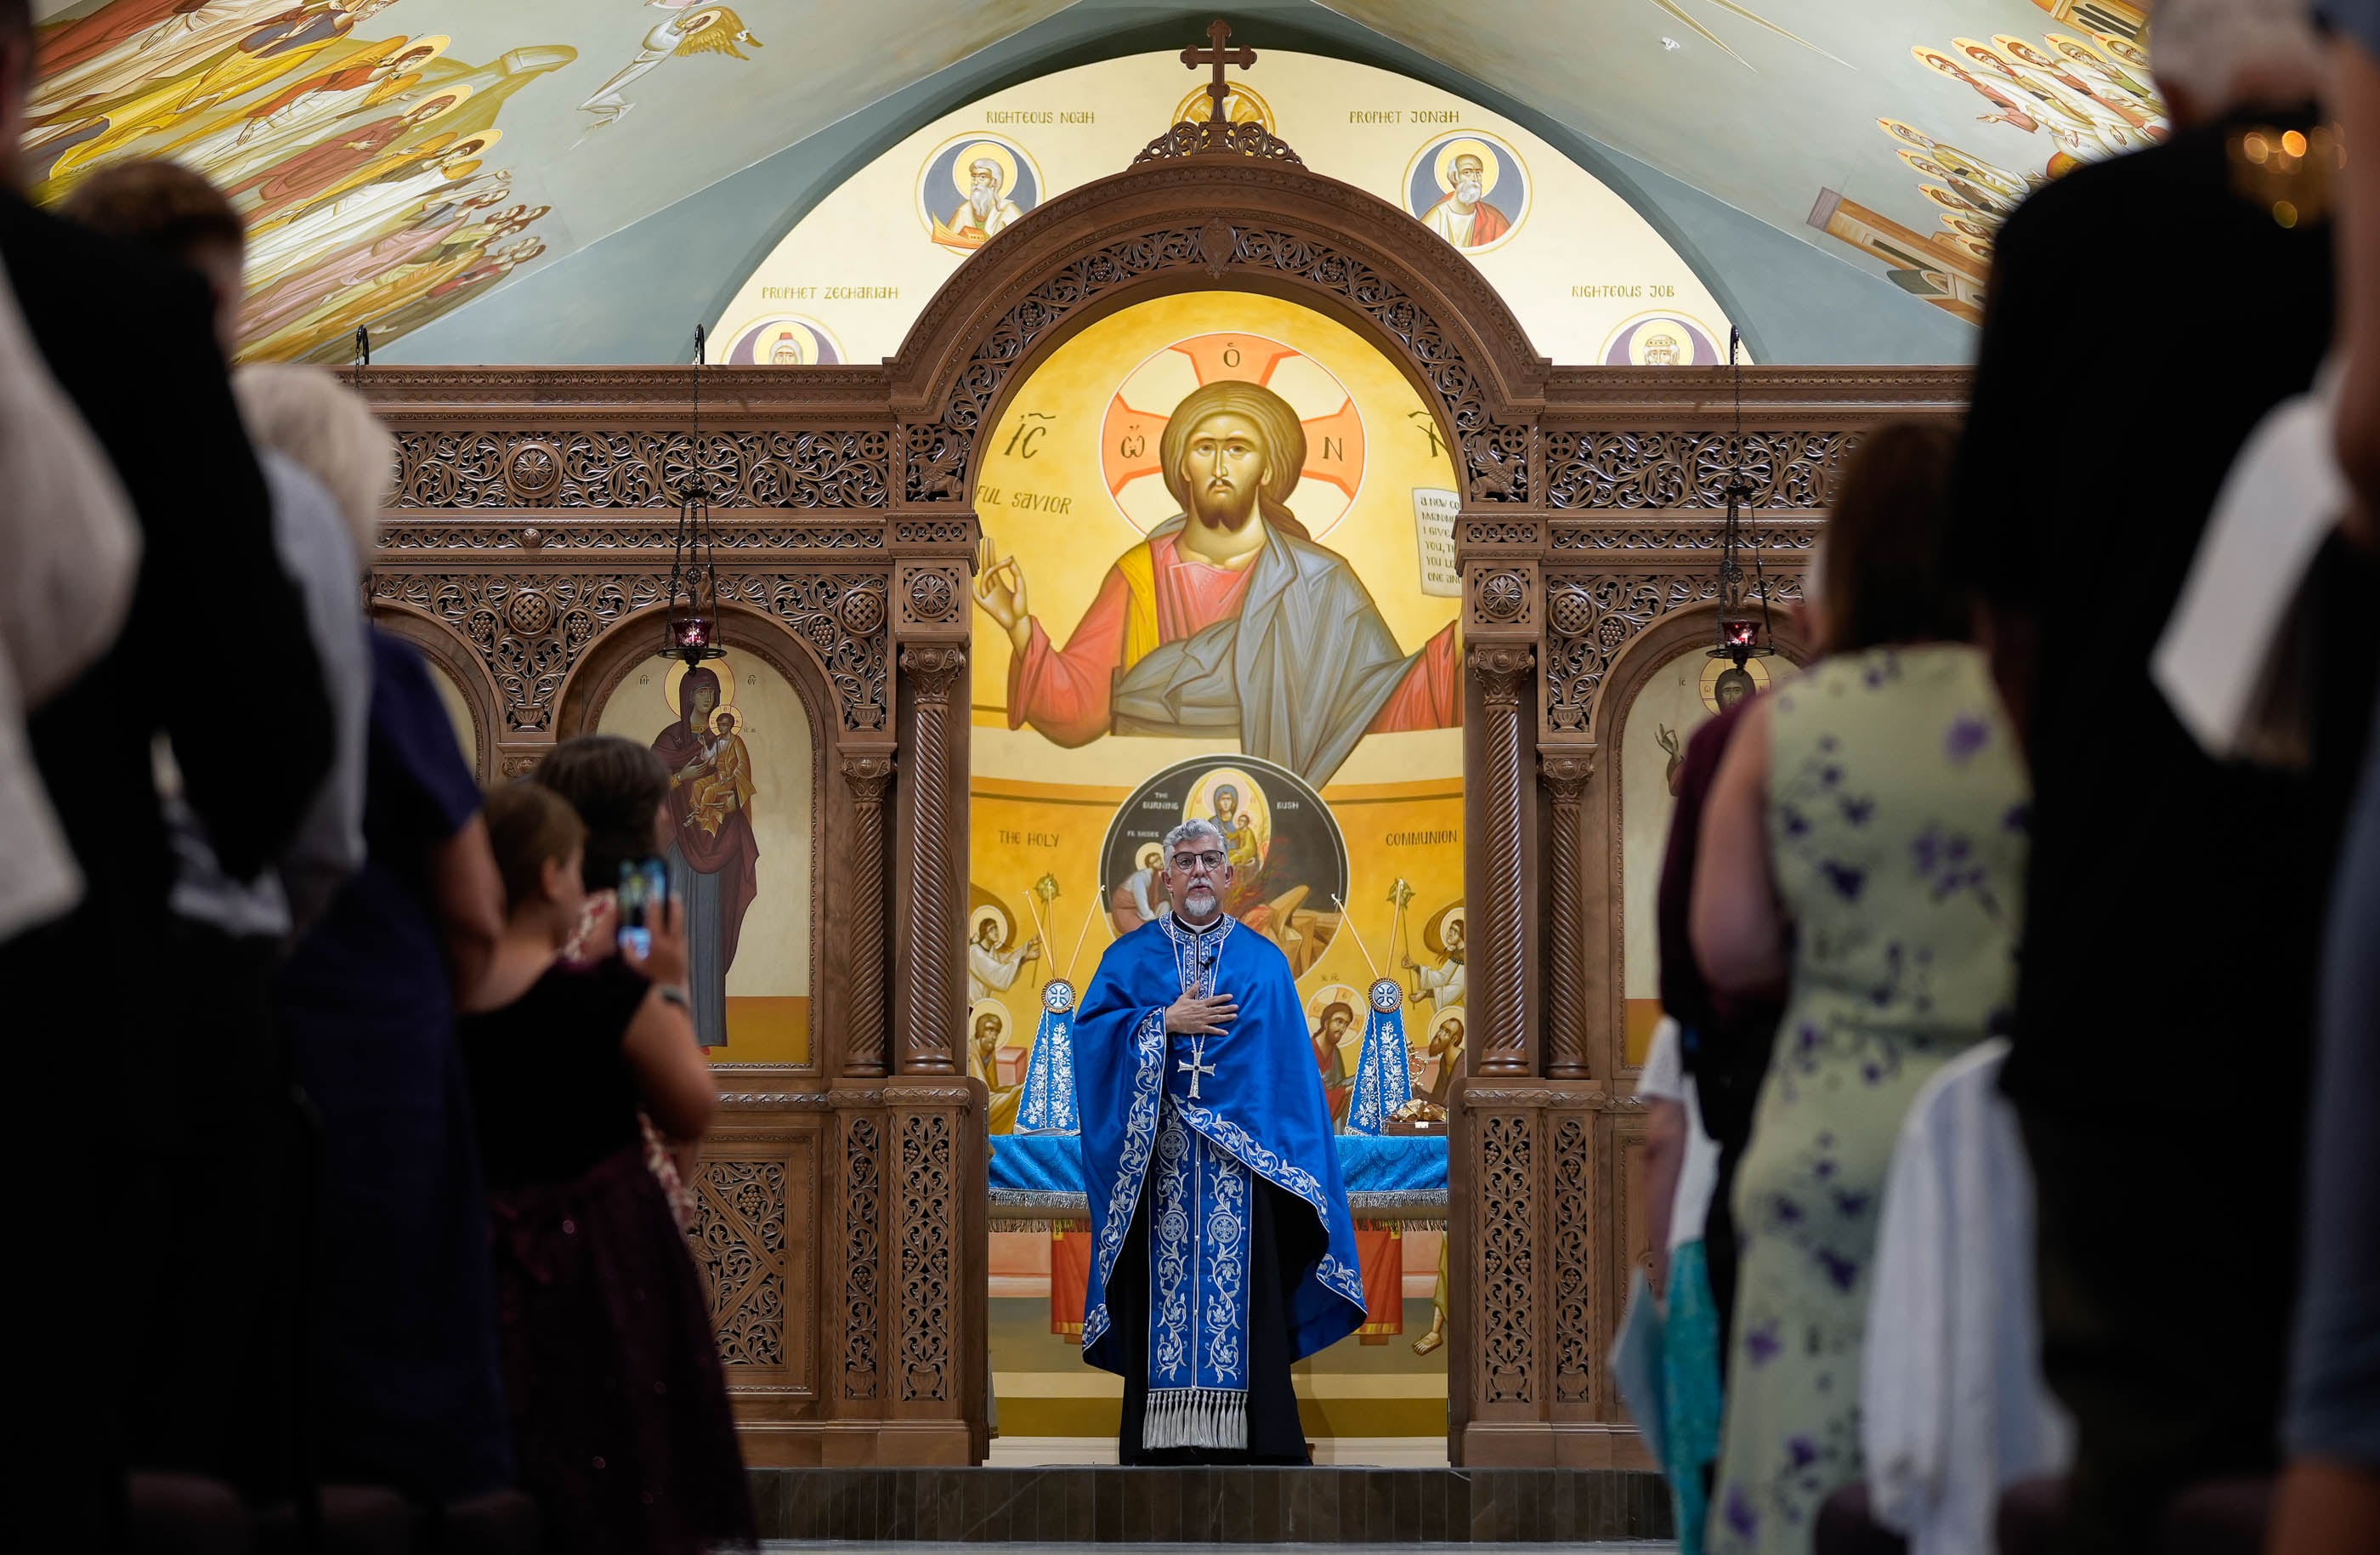 (Francisco Kjolseth | The Salt Lake Tribune) Father Anthony Savas of St. Anna Greek Orthodox Church in Sandy addresses parishioners during opening services on Saturday, July 13, 2024, at the new church that was transformed from a garden center into a sacred sanctuary by iconographers from Athens.